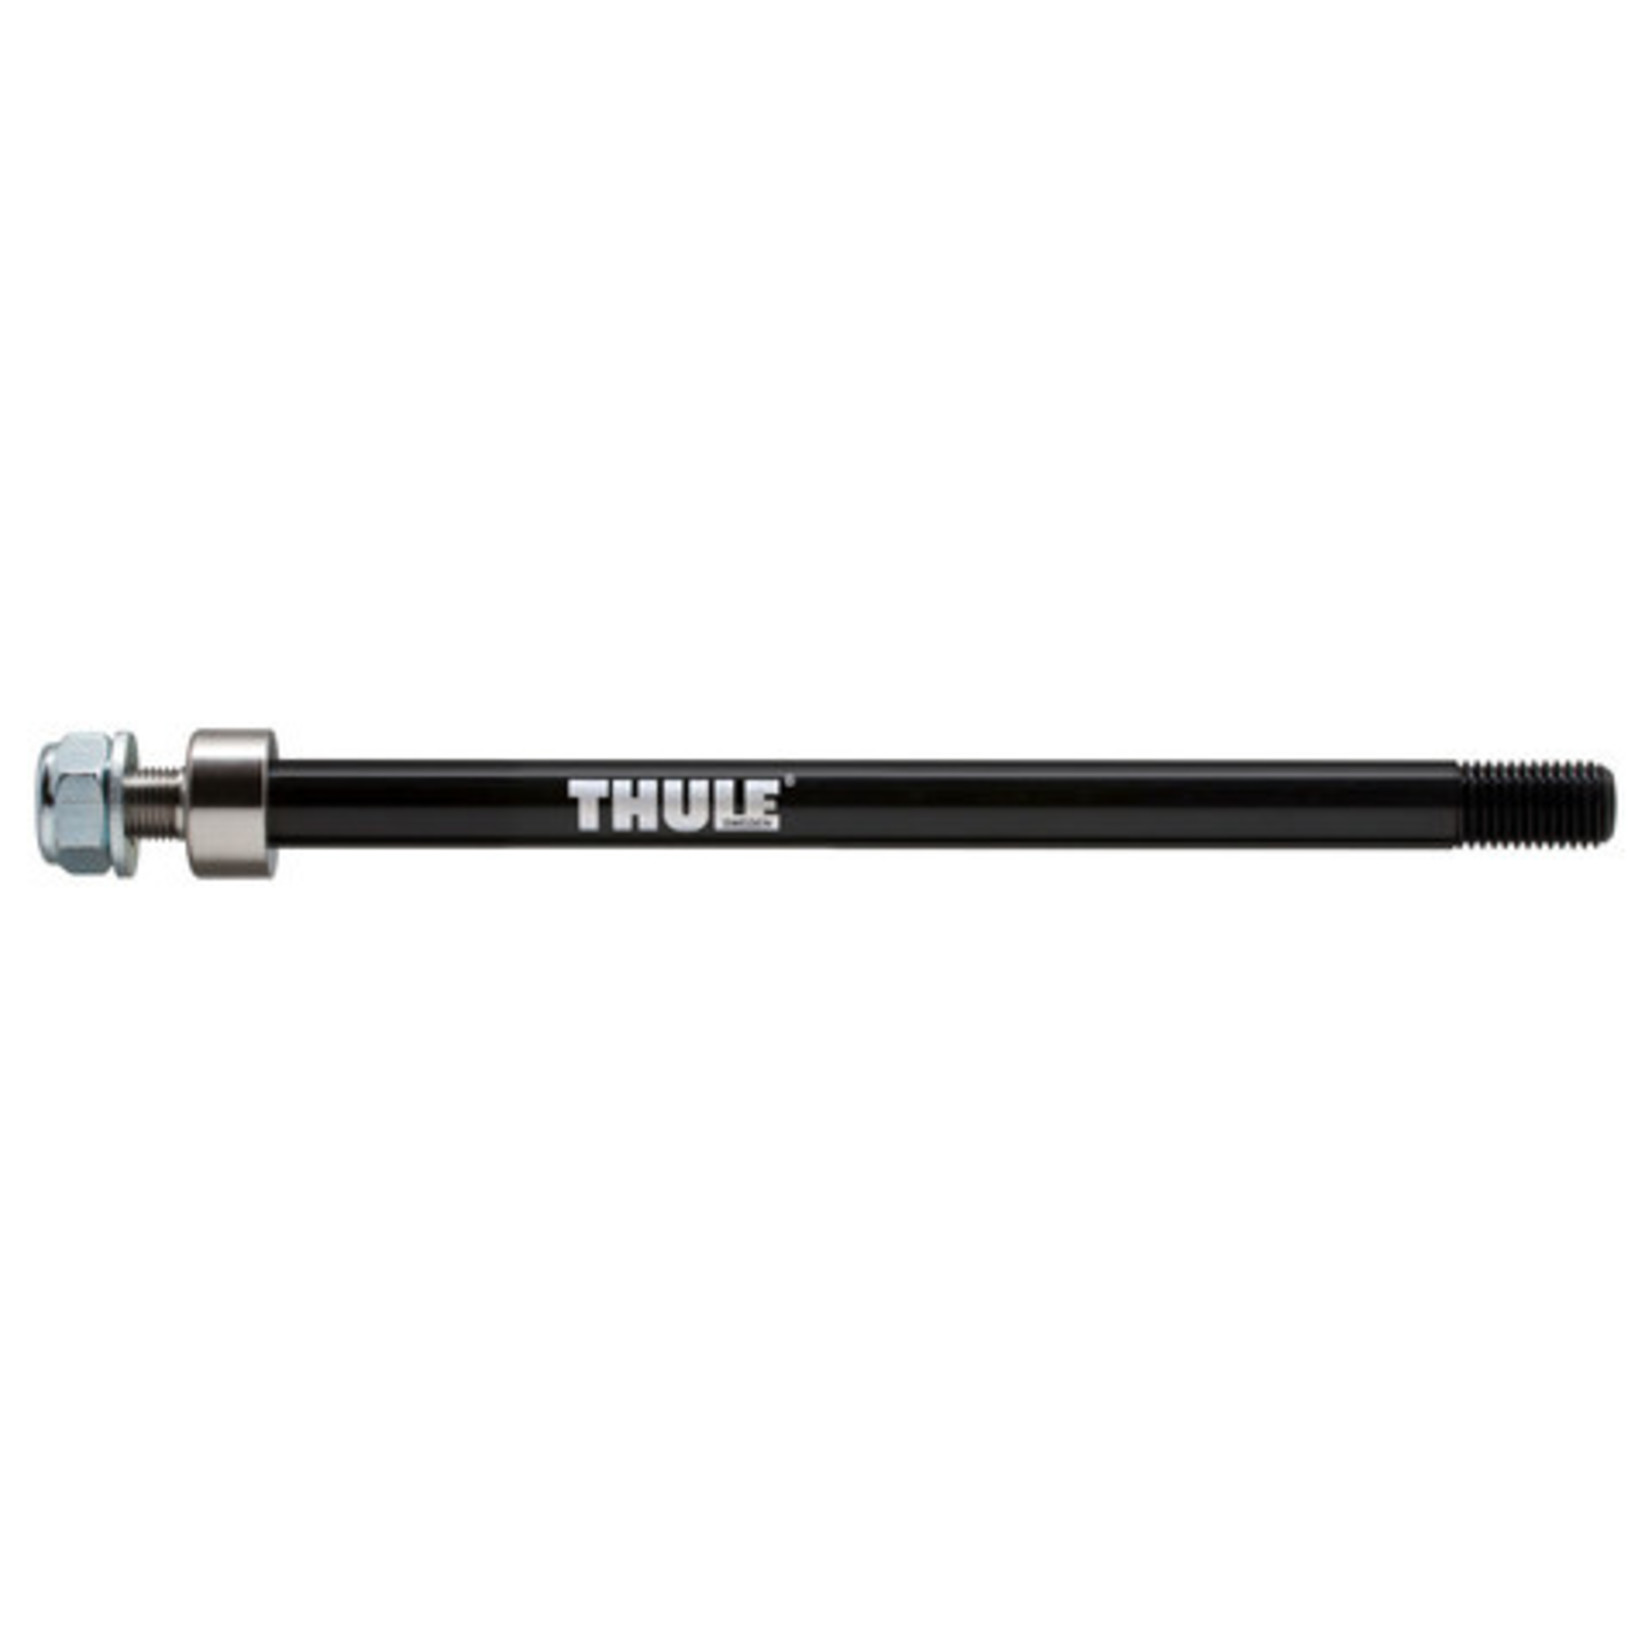 Thule Thule Thru Axle Syntace (M12 x 1.0) Adapter 152-167mm 20110729 - Black